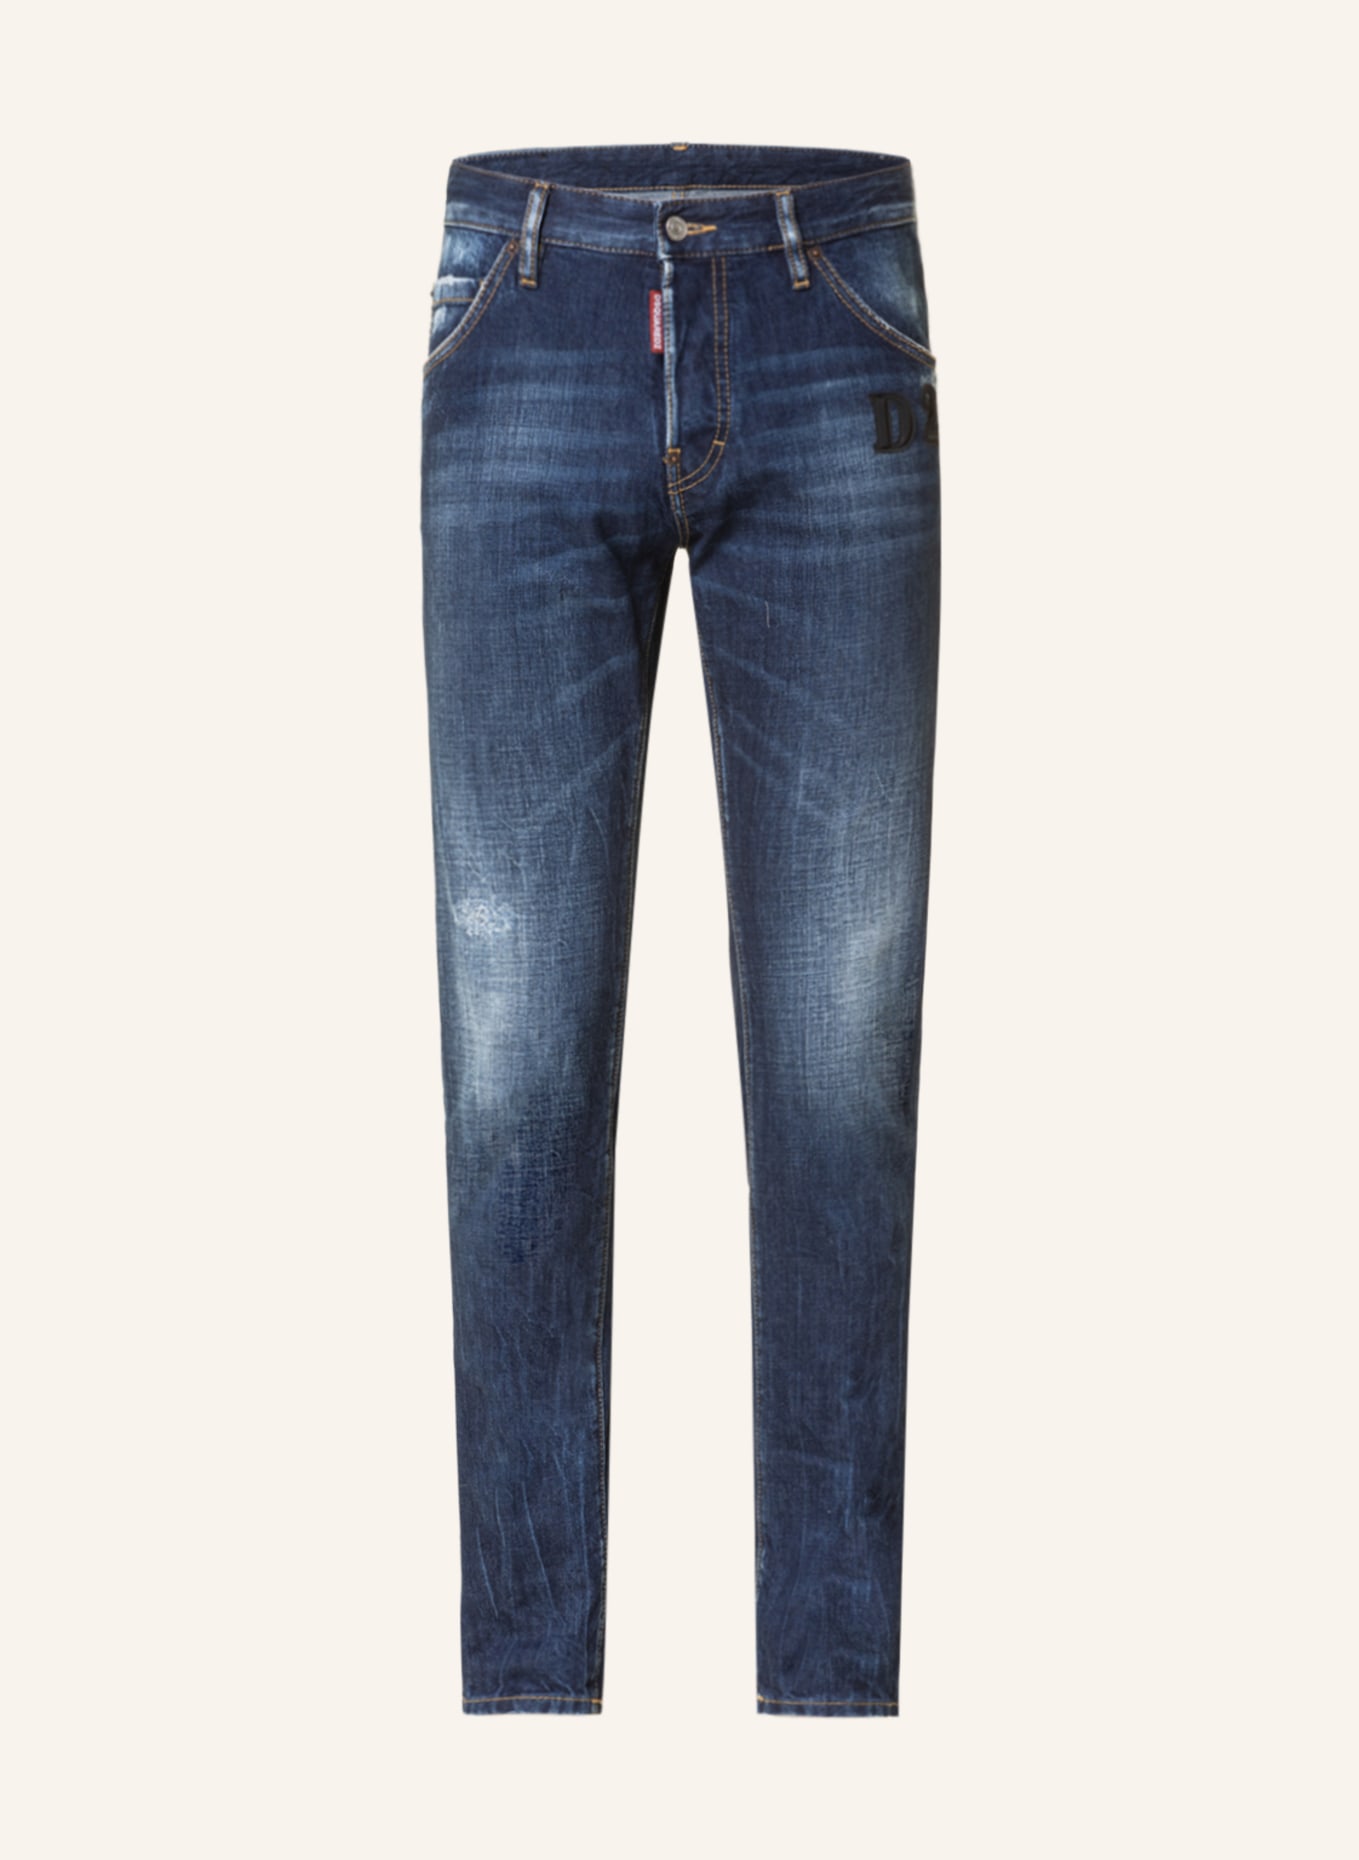 DSQUARED2 Jeans COOL GUY Extra Slim Fit, Farbe: 470 BLUE NAVY (Bild 1)